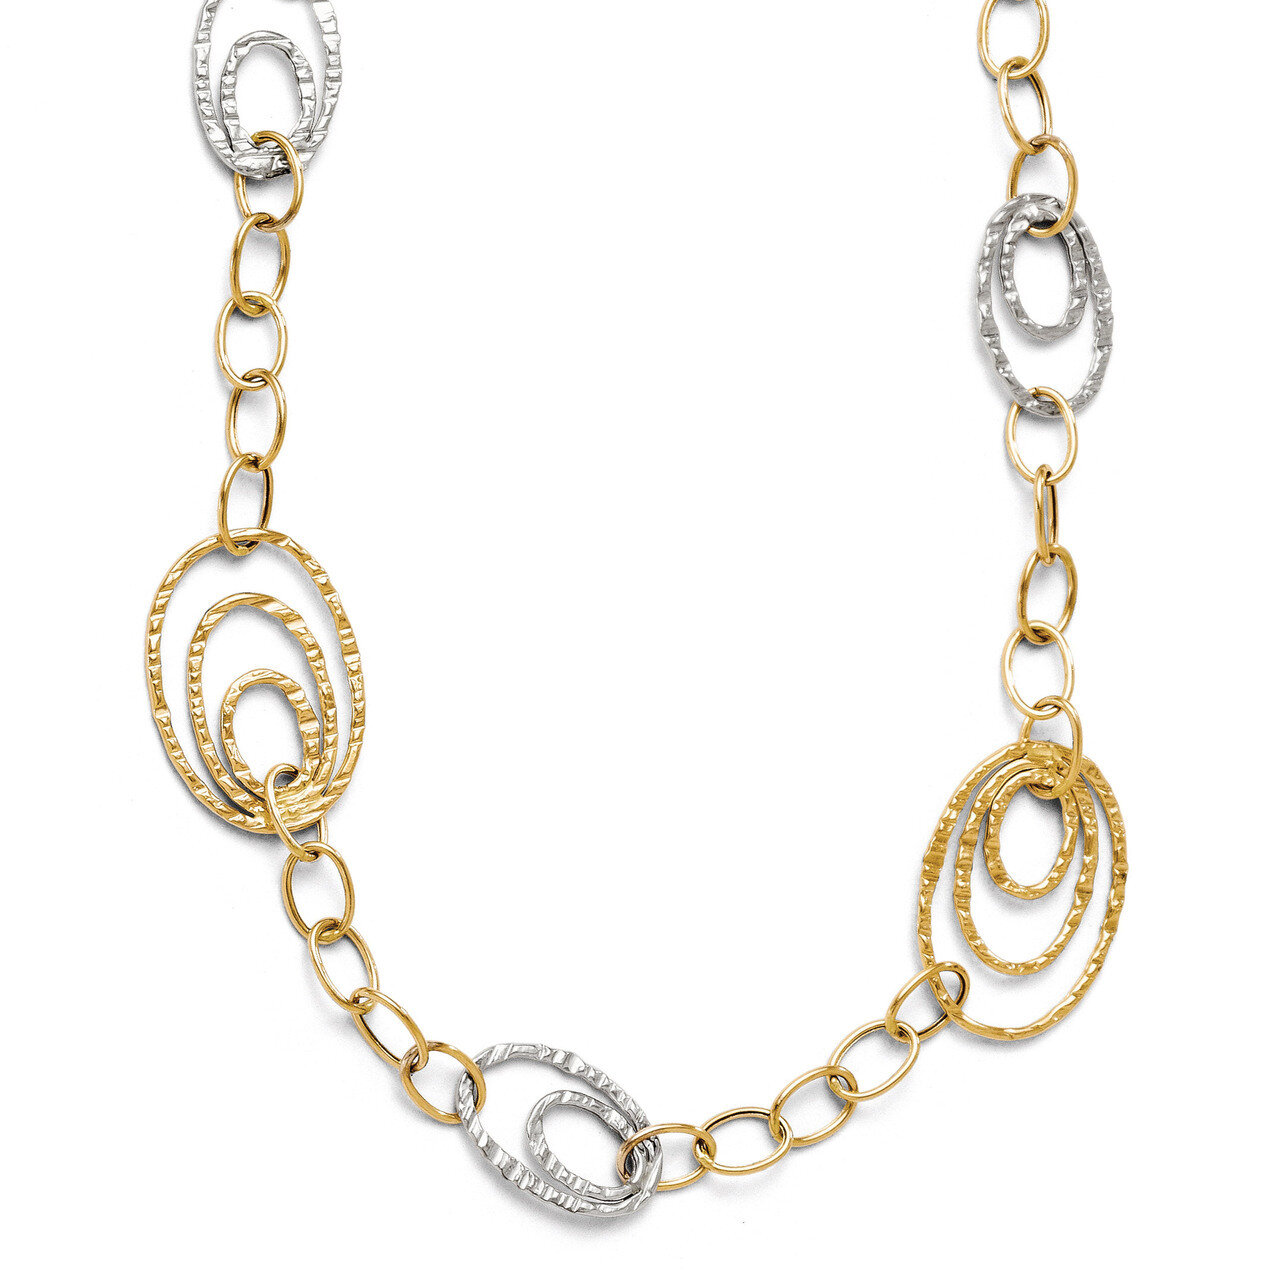 Fancy Link Necklace Chain 17 Inch - 14k Gold Two-tone HB-3849-17